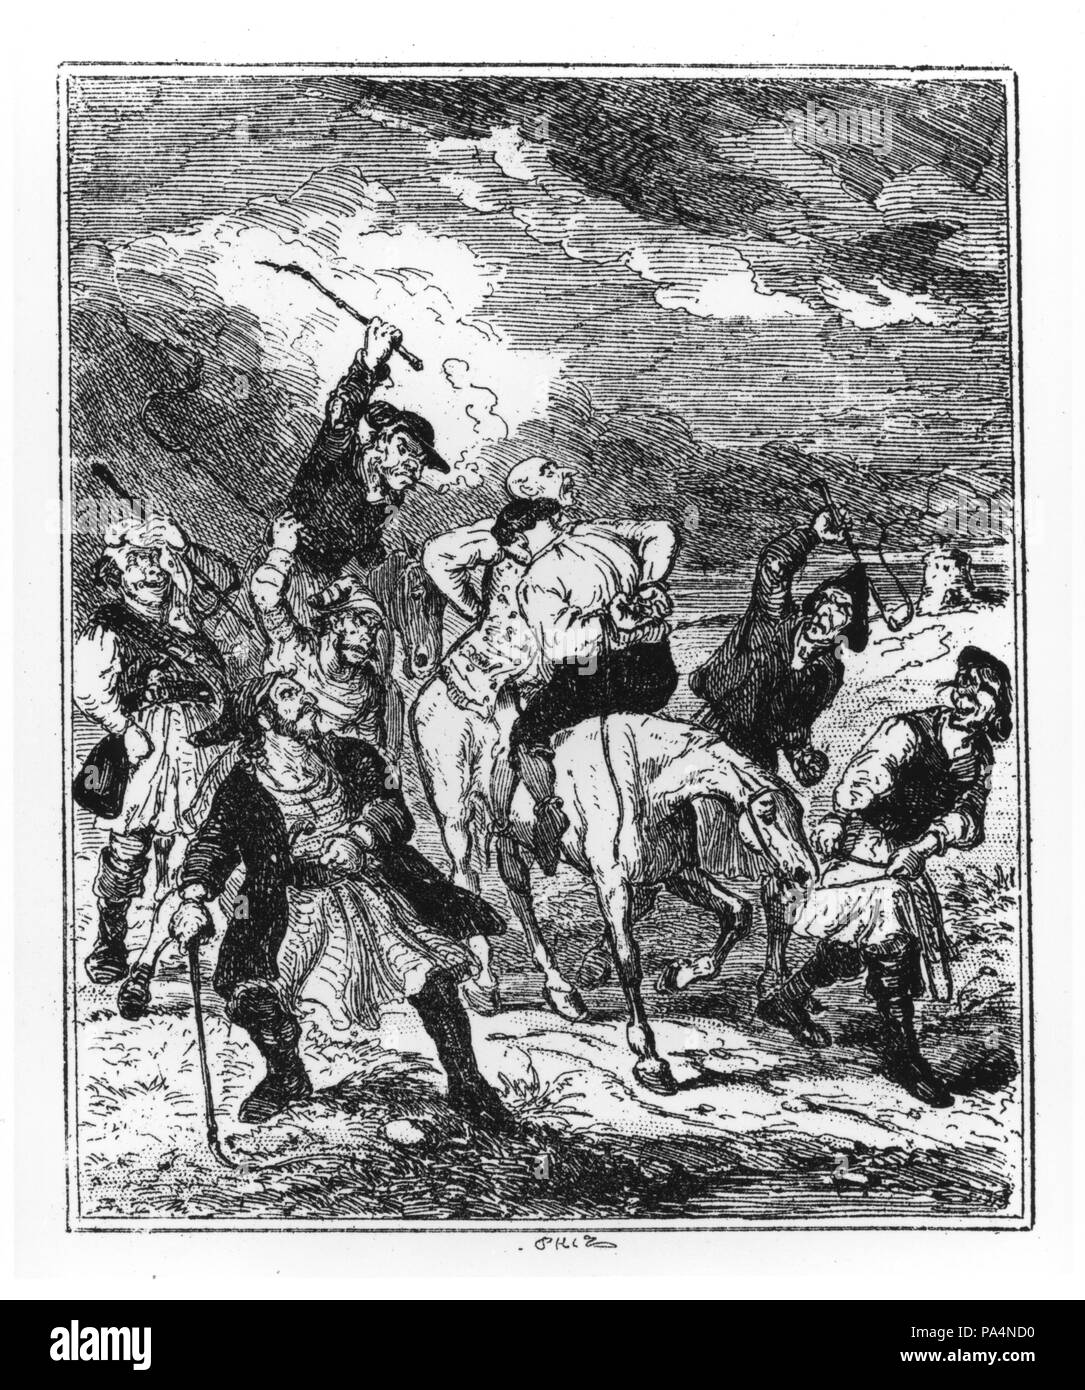 Engraving entitled the Murder of Galley and Chester by smugglers. From The Book of Remarkable Trials and Notorious Characters, edited by Captain L. Benson, pg. 198 Stock Photo